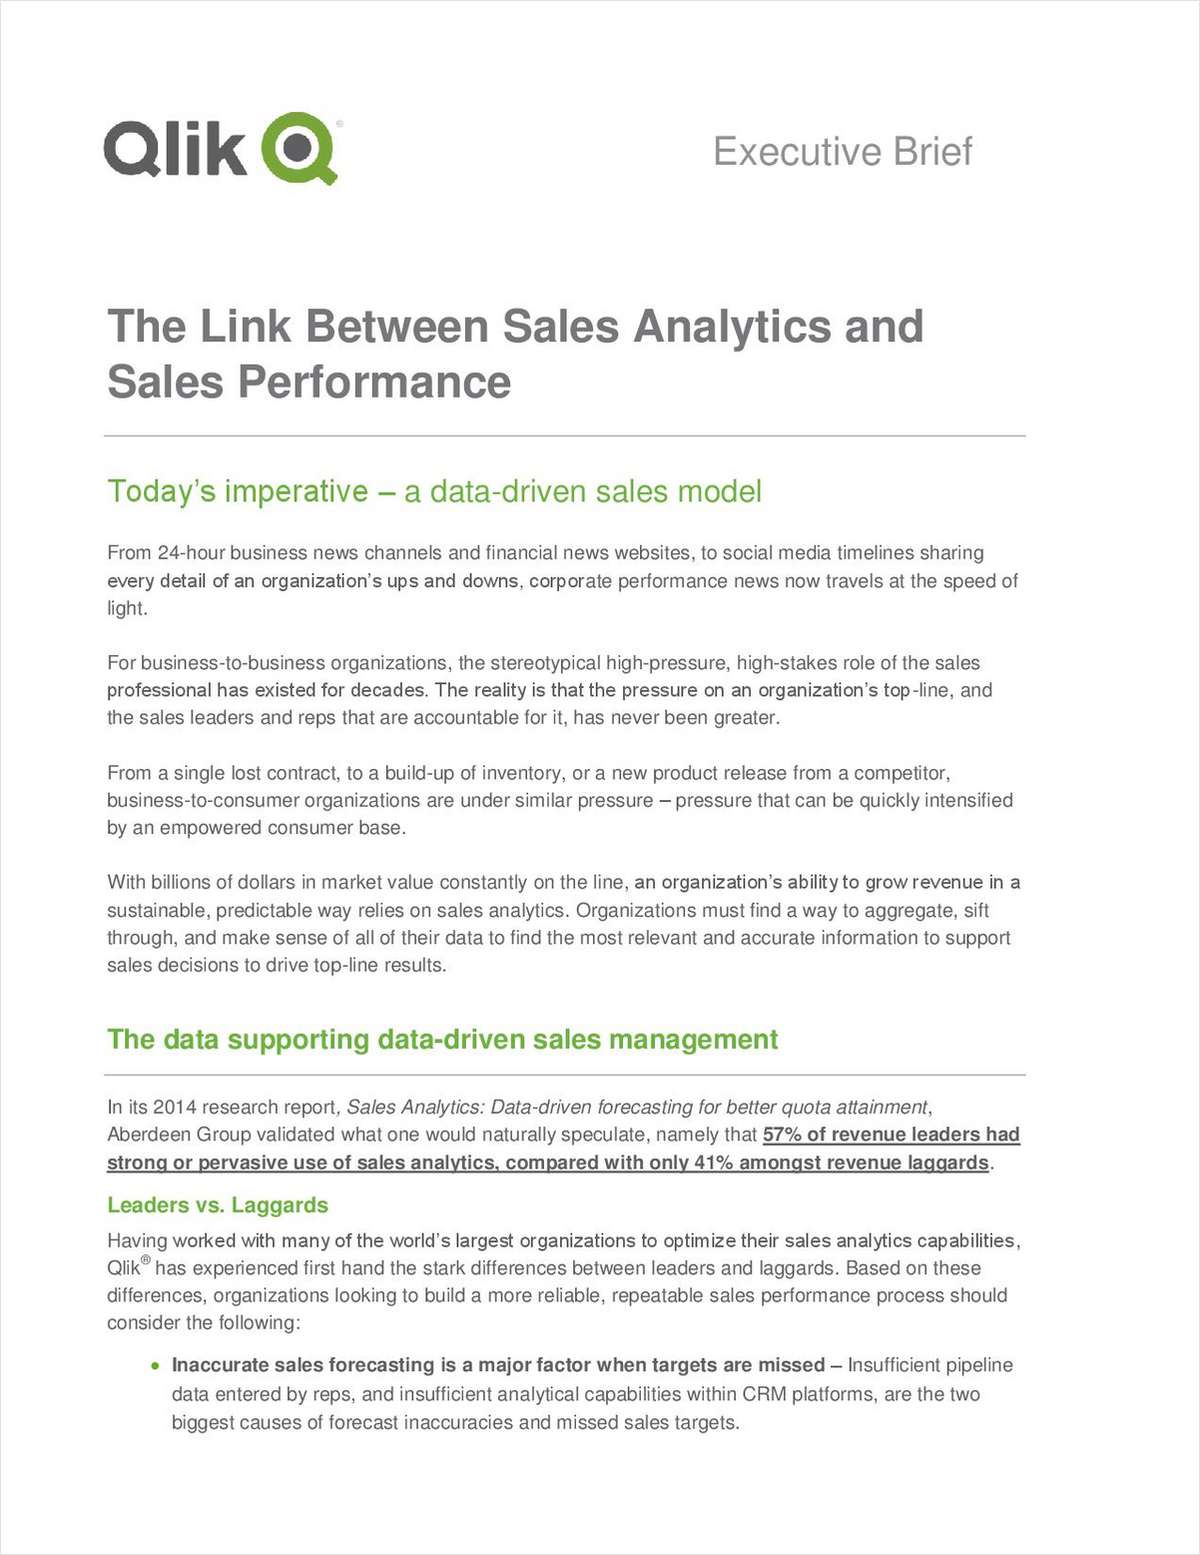 The Link between Sales Analytics and Sales Performance